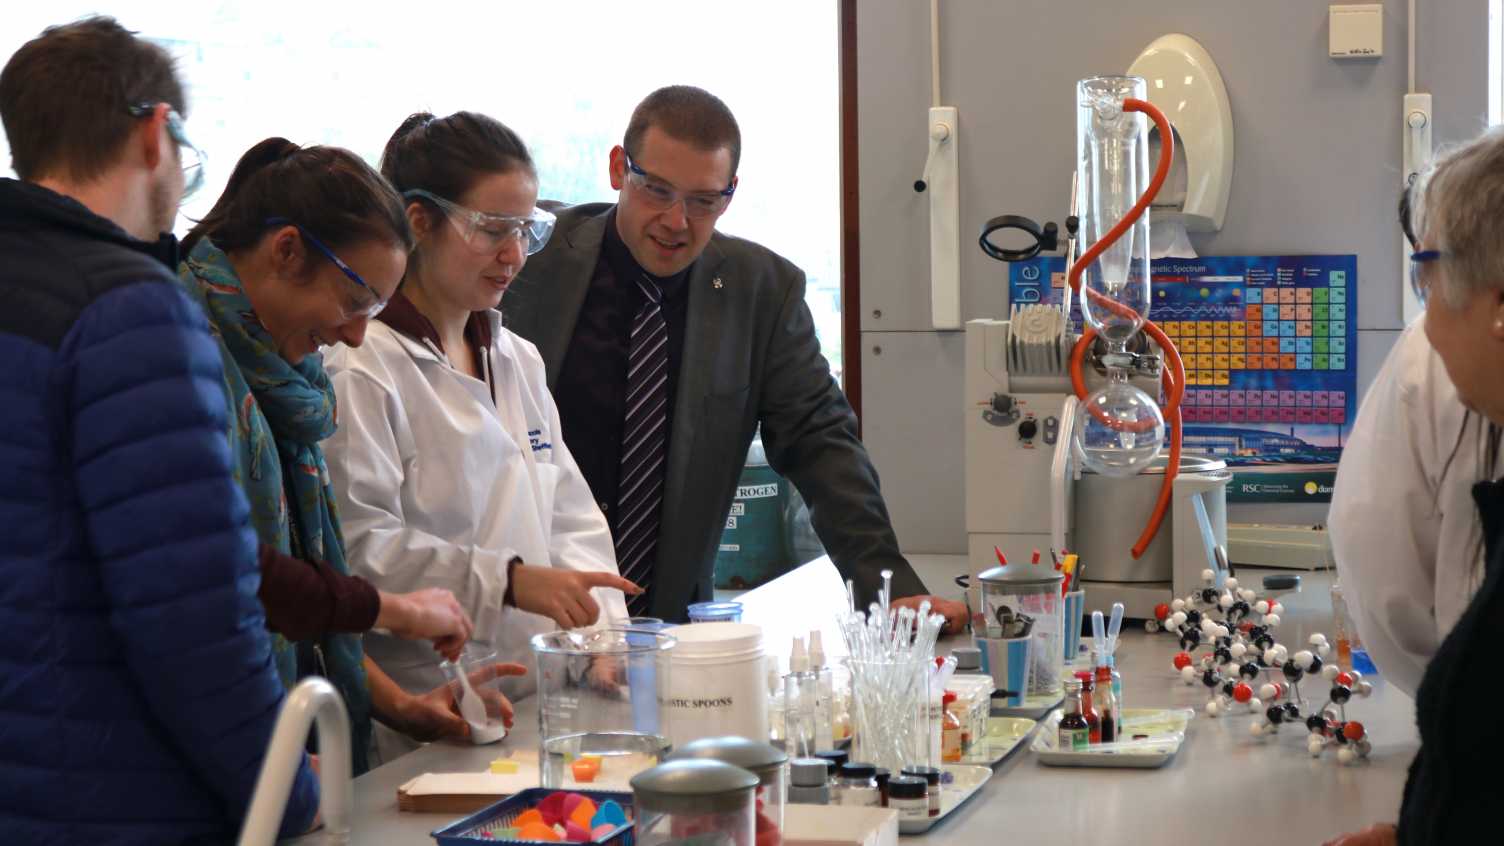 Thumbnail for Kroto Schools Laboratory opens in Sir Harry's memory | Chemistry